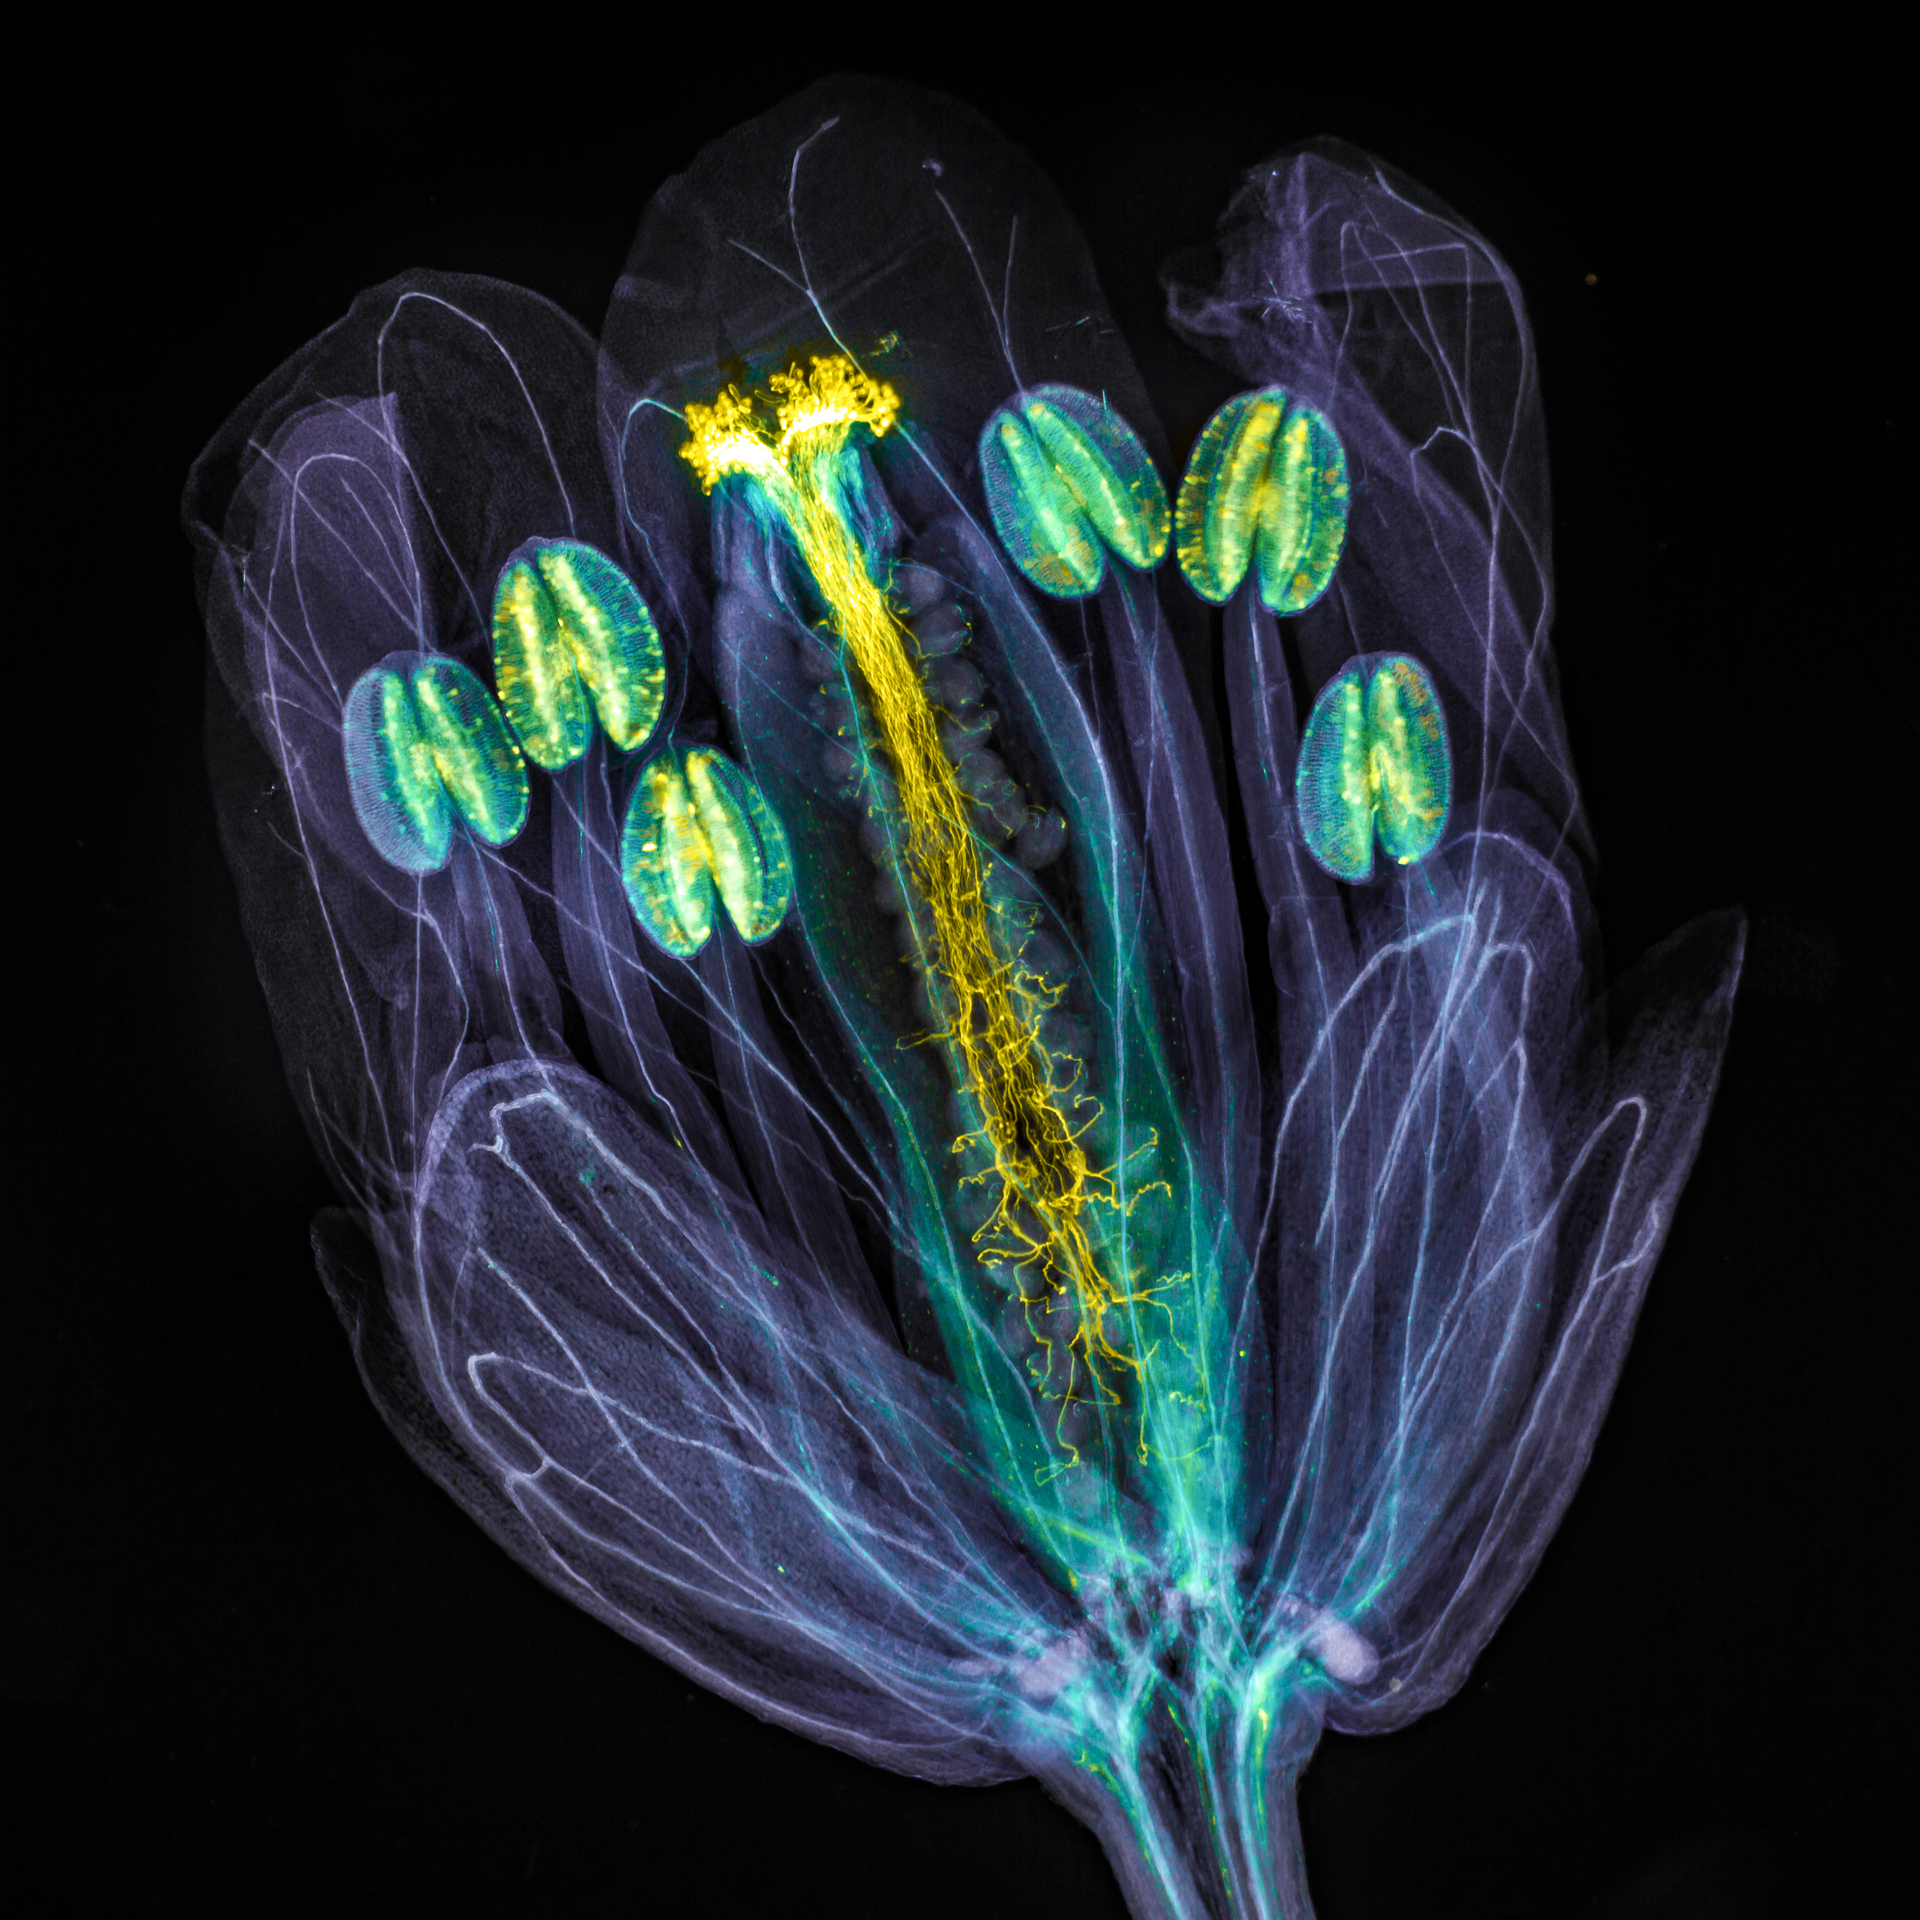 Winning image by photographer Jan Martinek shows glowing pollen tubes from the Arabidopsis thaliana plant -